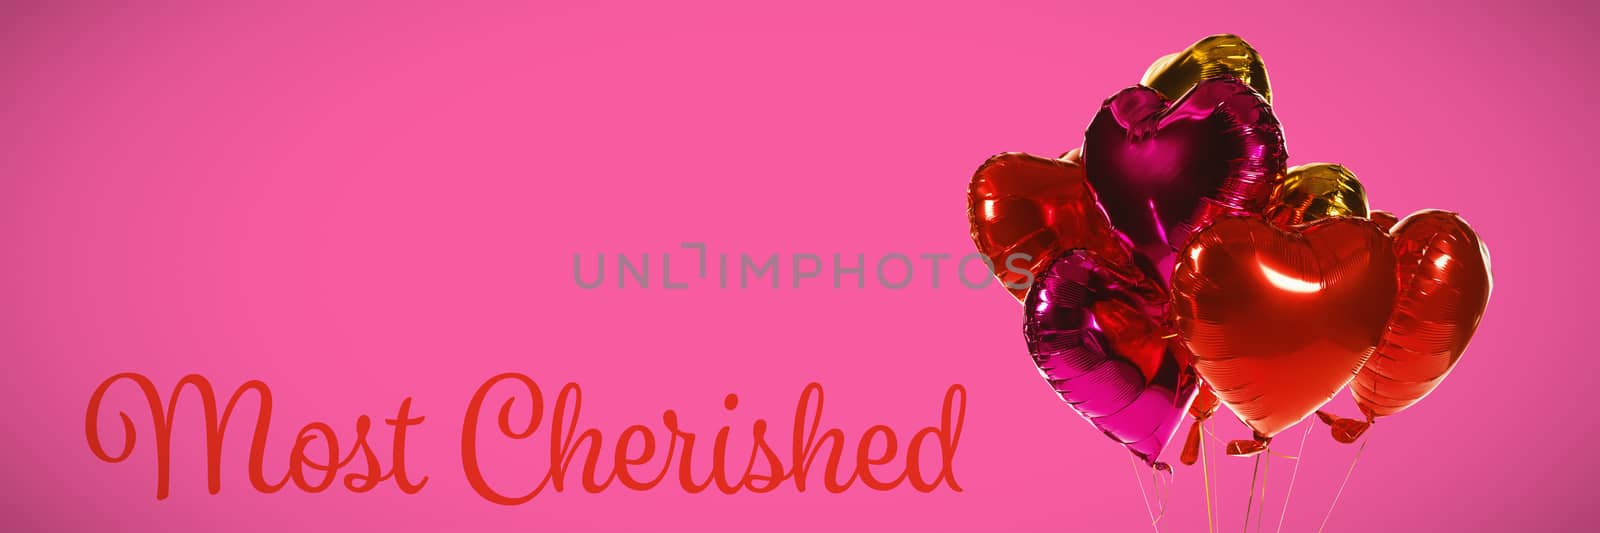 Cute Valentines Day Message with balloons on pastel background